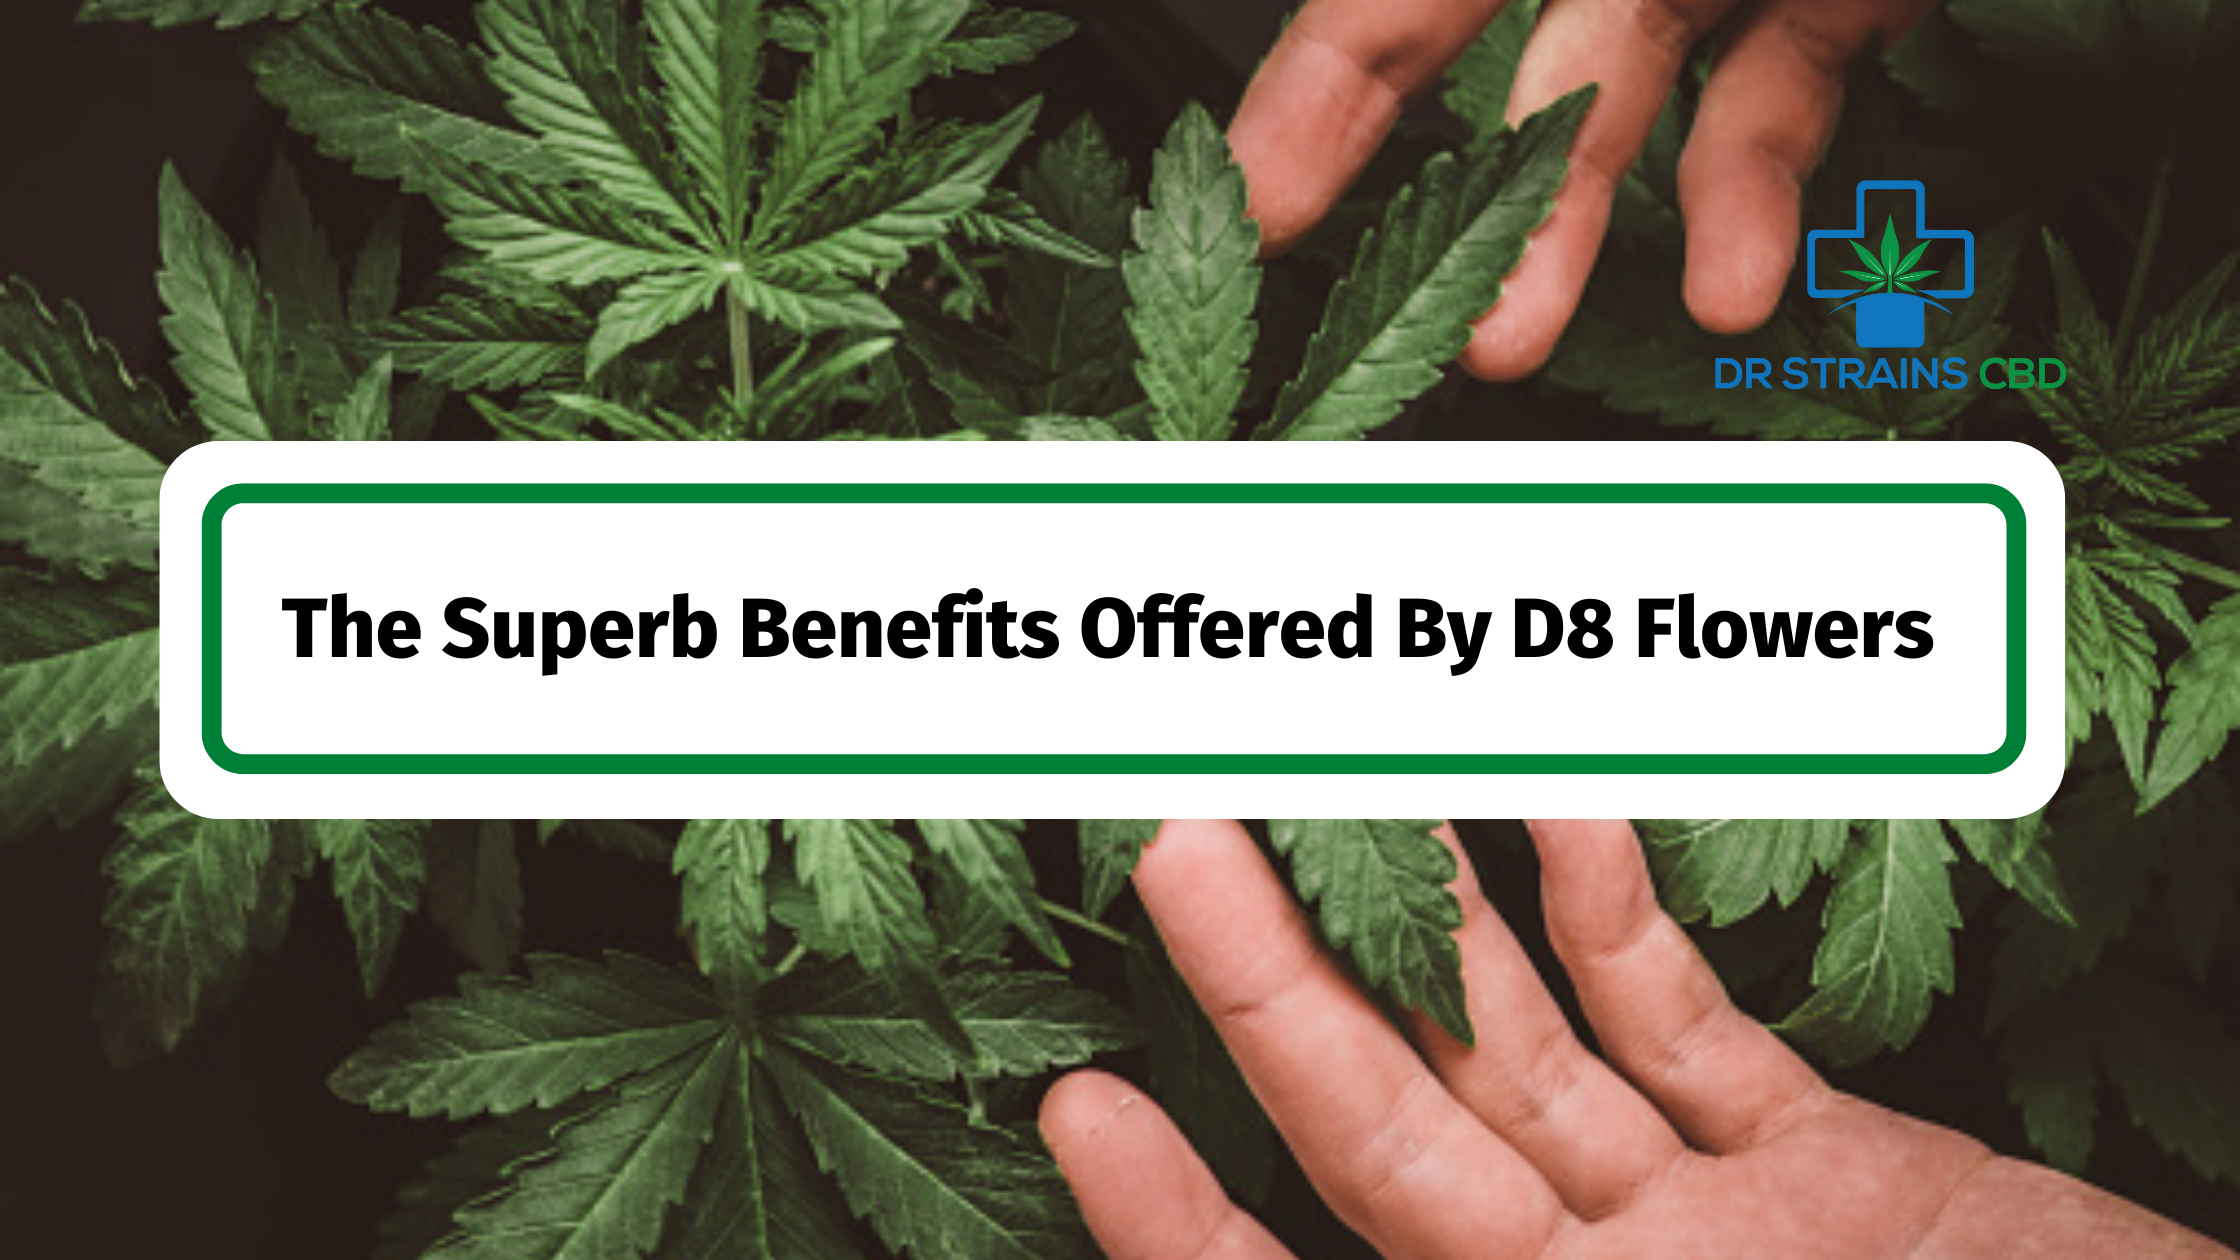 <strong>The Superb Benefits Offered By D8 Flowers</strong>